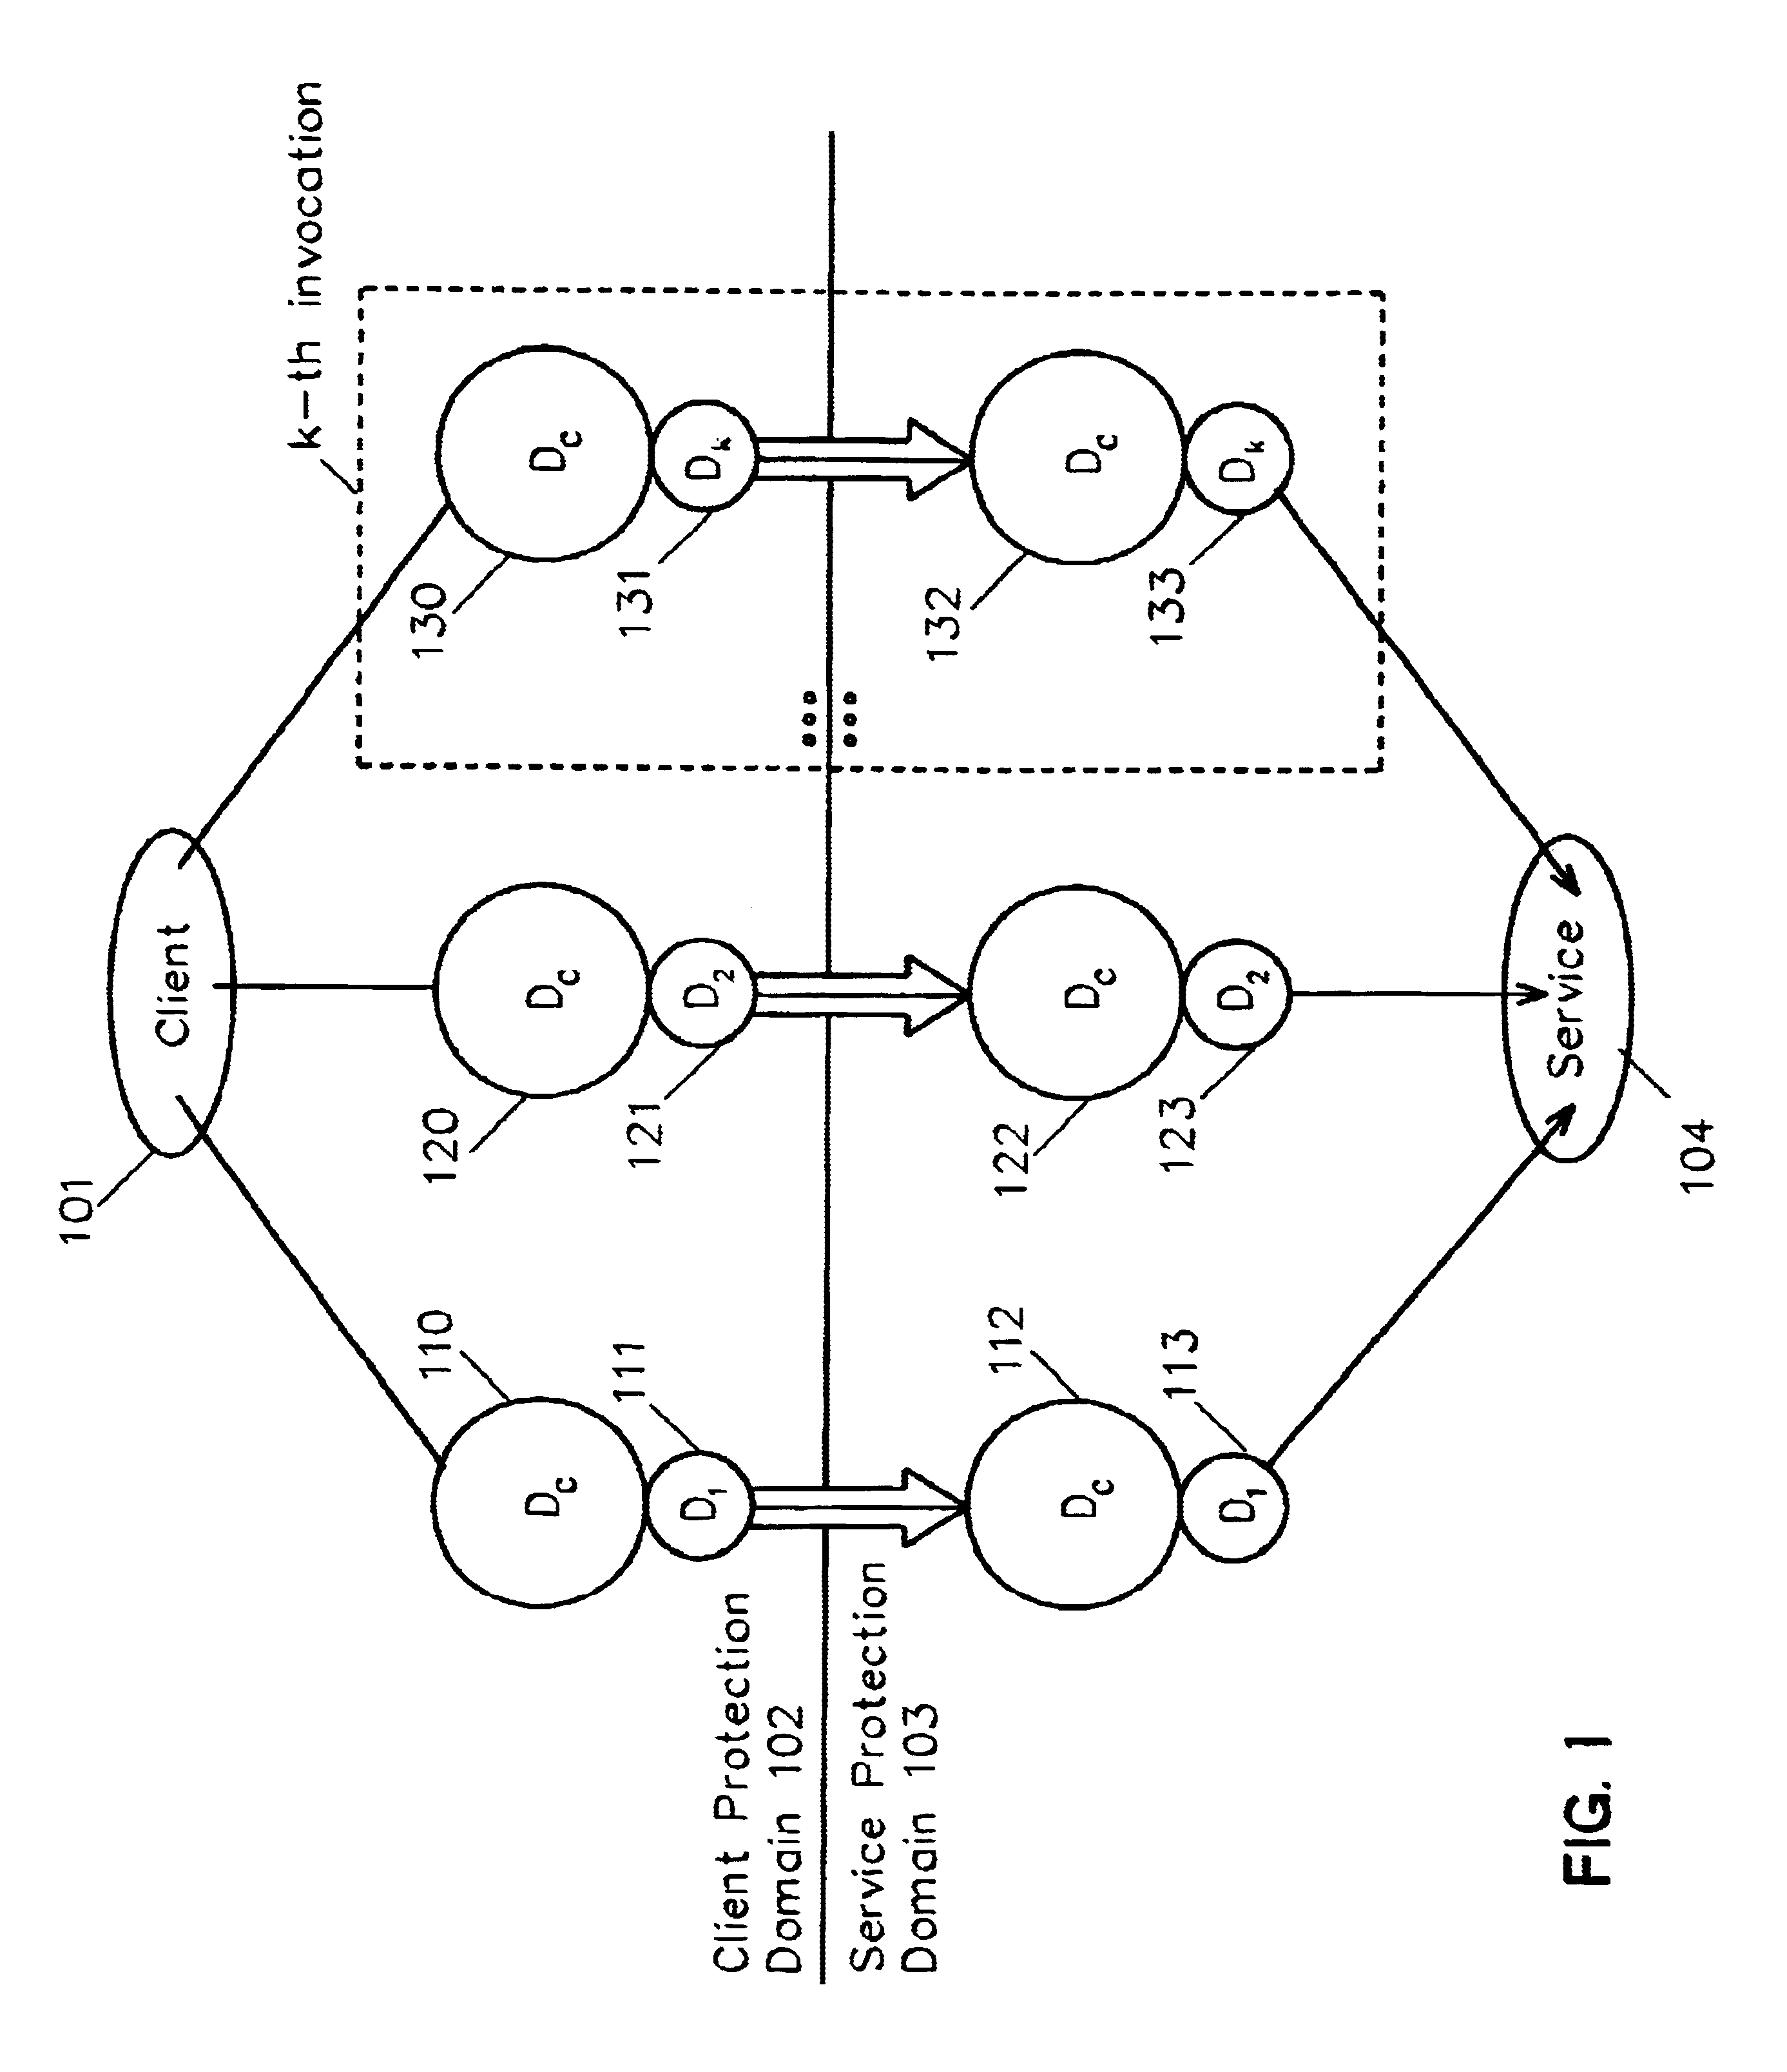 Method and system for cross-domain service invocation using a single data handle associated with the stored common data and invocation-specific data